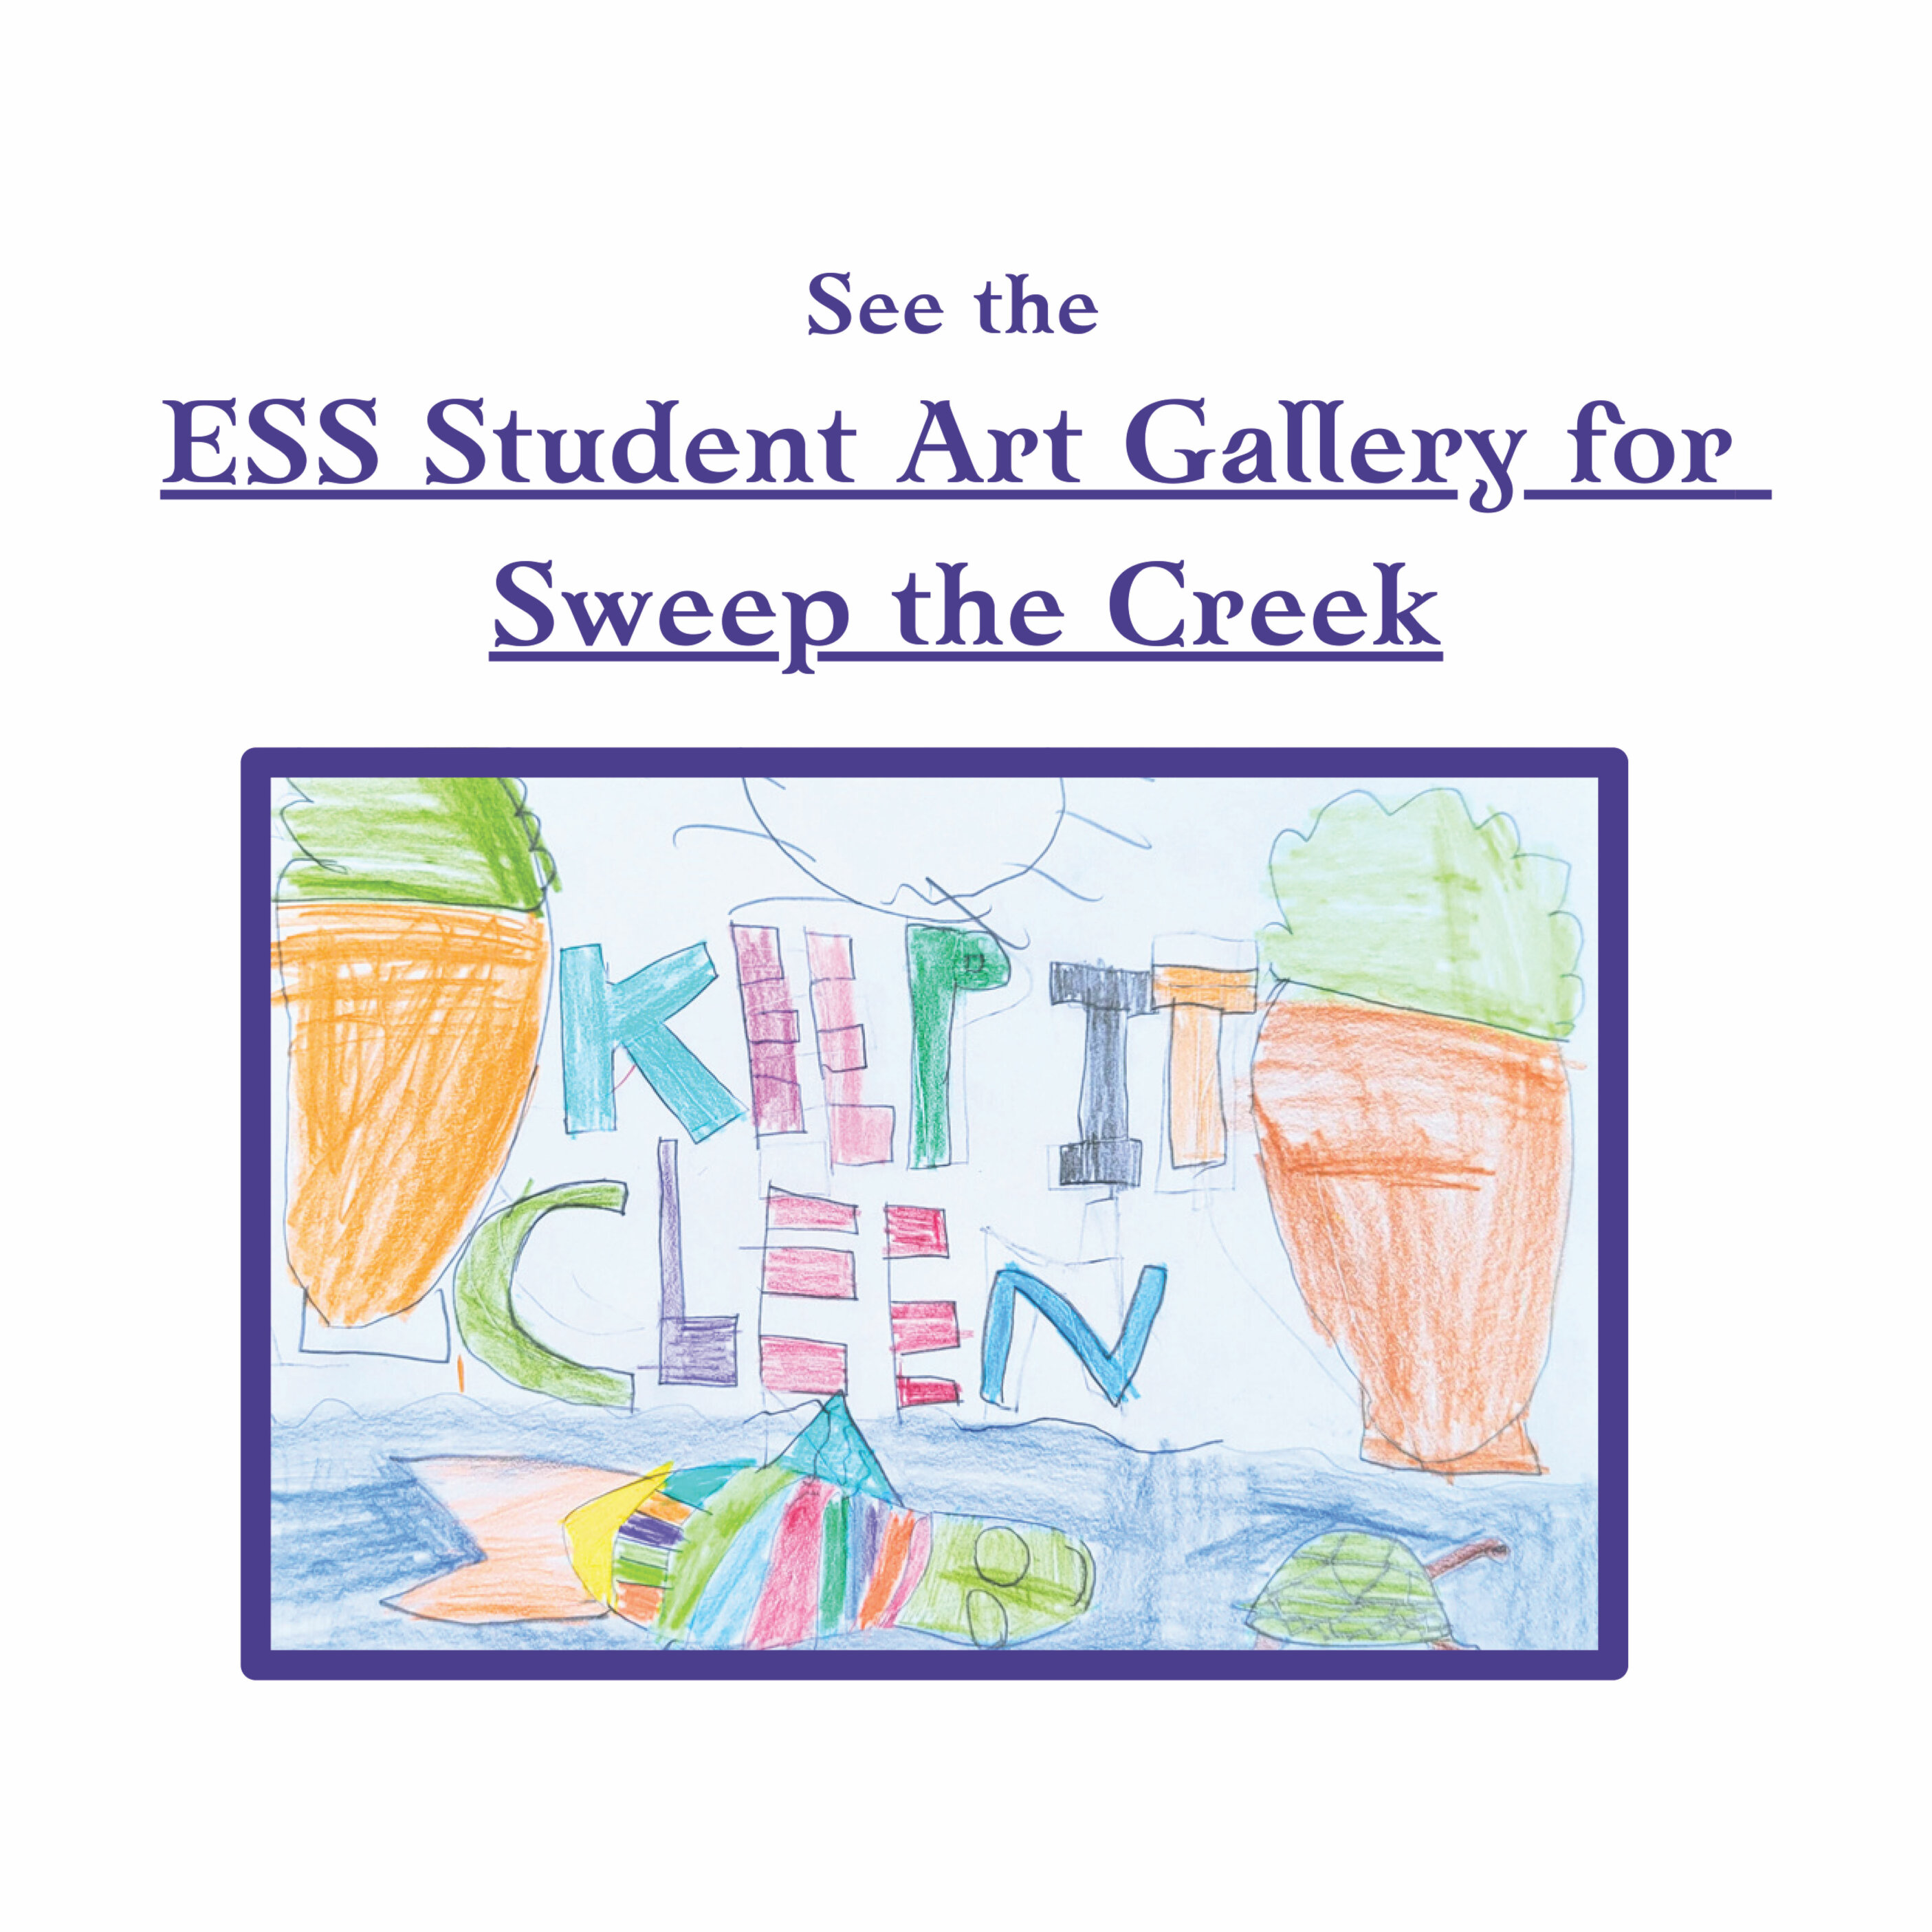 See the ESS Student Art Gallery for Sweep the Creek